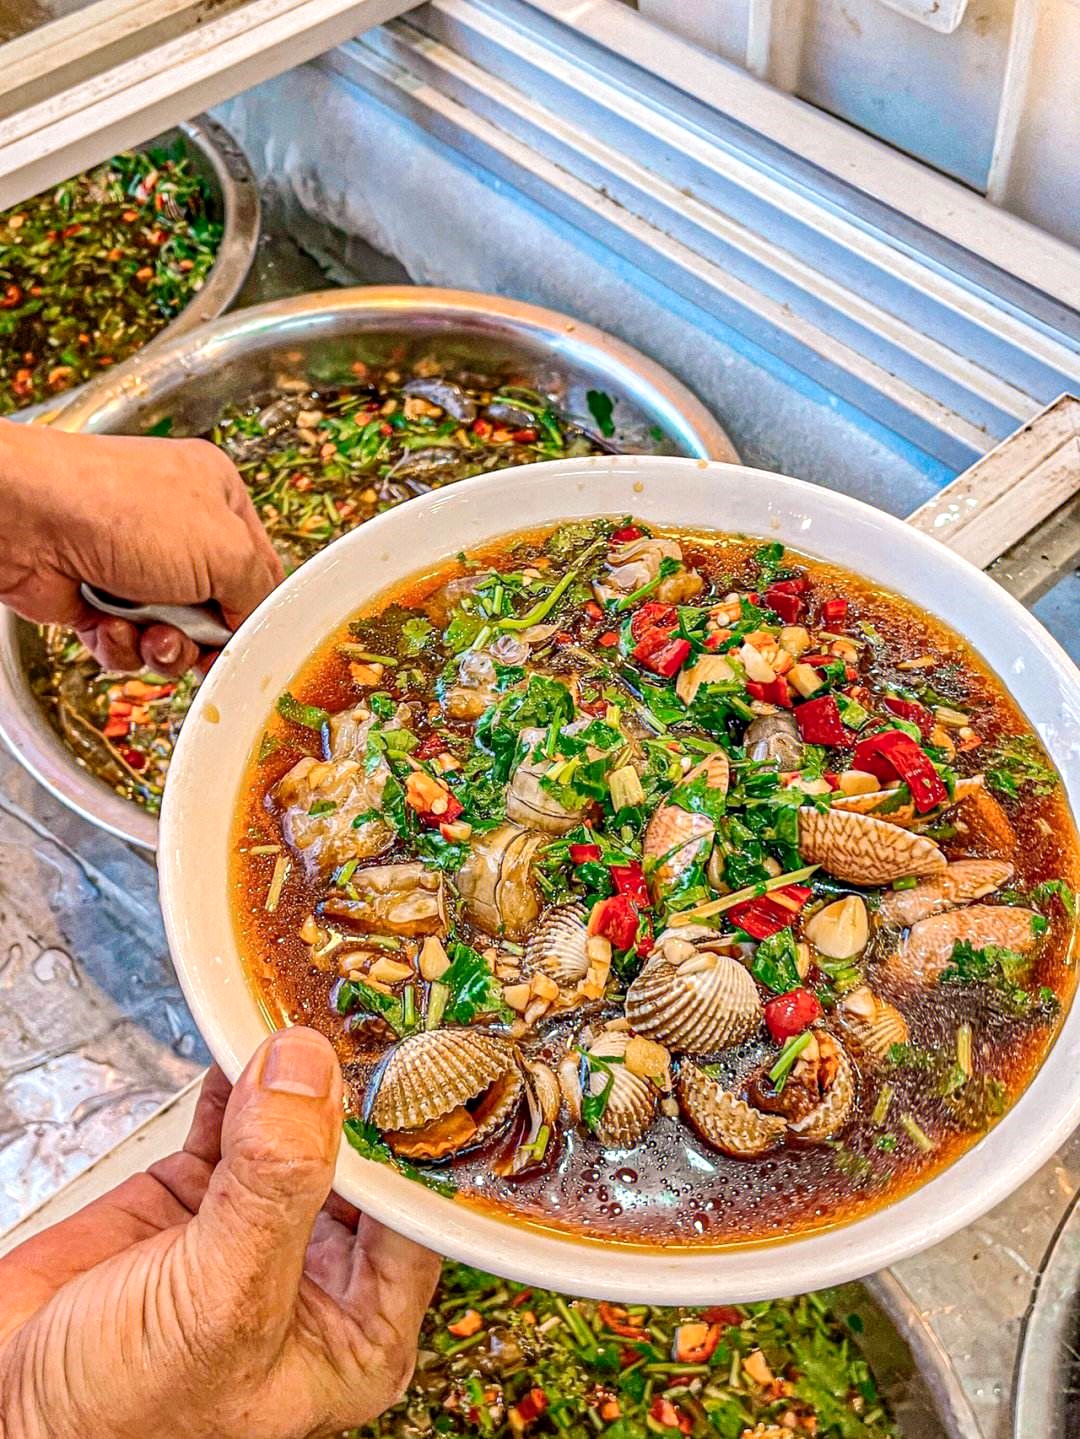 Raw pickled seafood made from fresh seafood marinated in citrus juices such as lemon or lime and spiced with chili peppers is popular in southern China. /Photo provided to CGTN